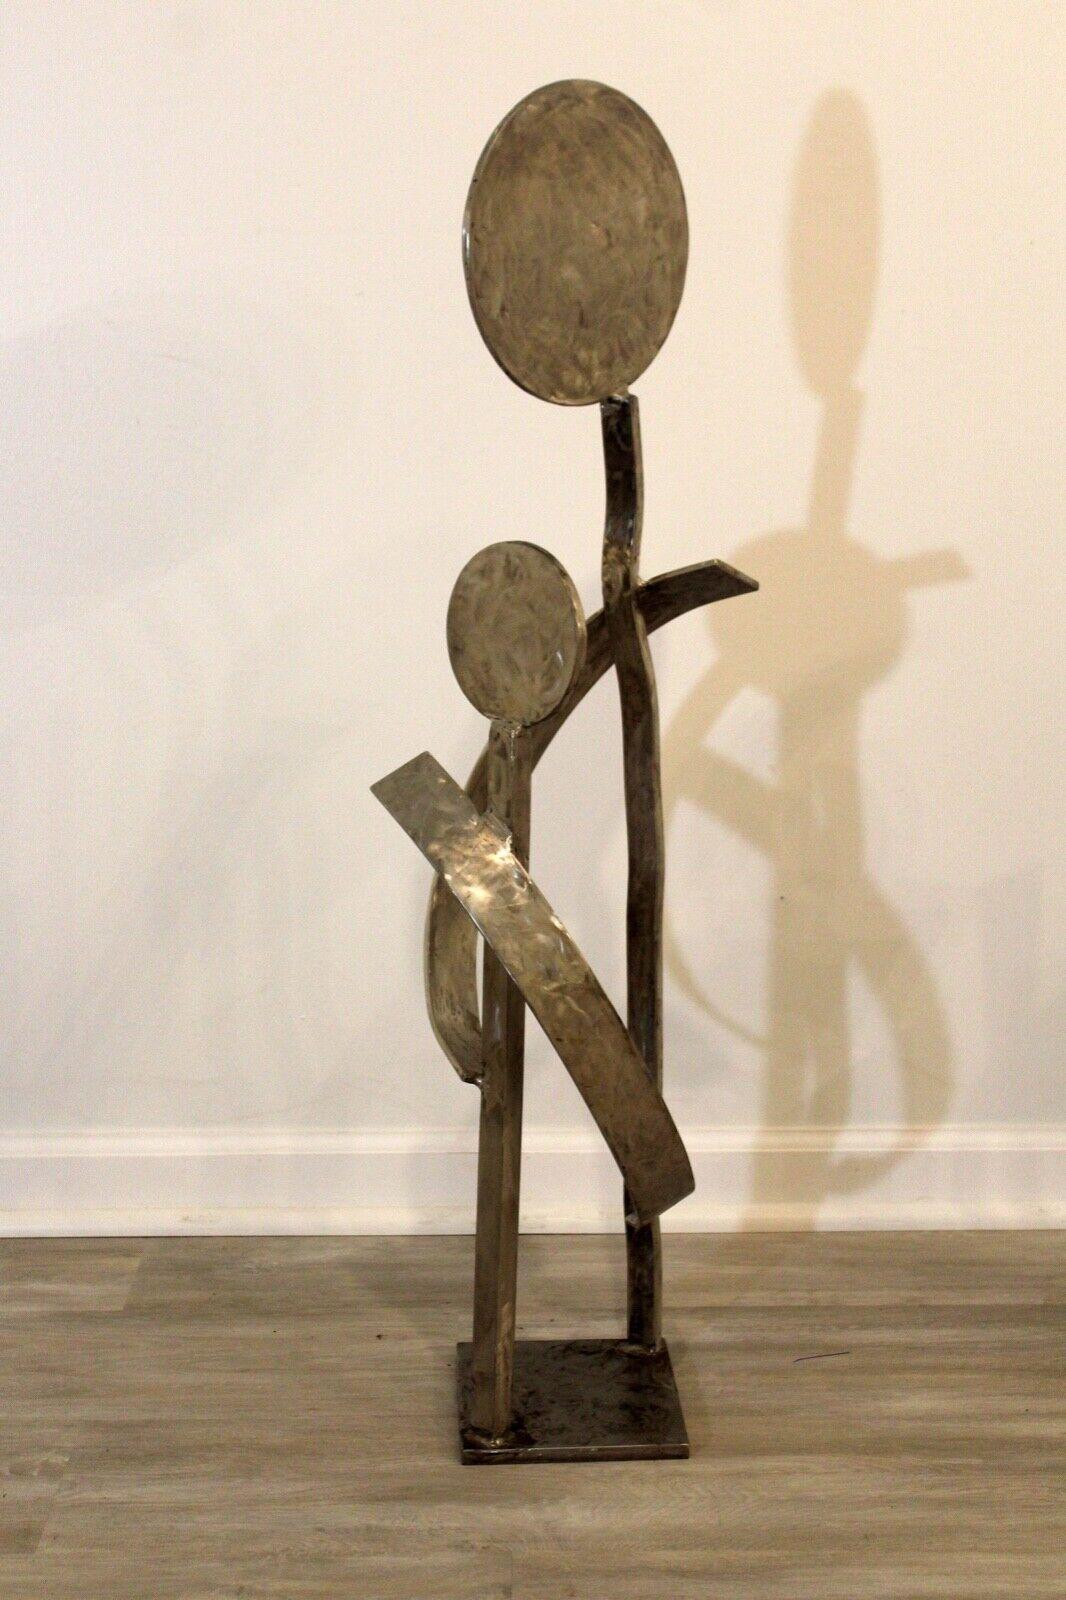 For your consideration is a fantastic, abstract, stainless steel floor indoor or outdoor sculpture, signed Robert D. Hansen. In excellent condition.

Dimensions: 7.5w x 9d x 28h